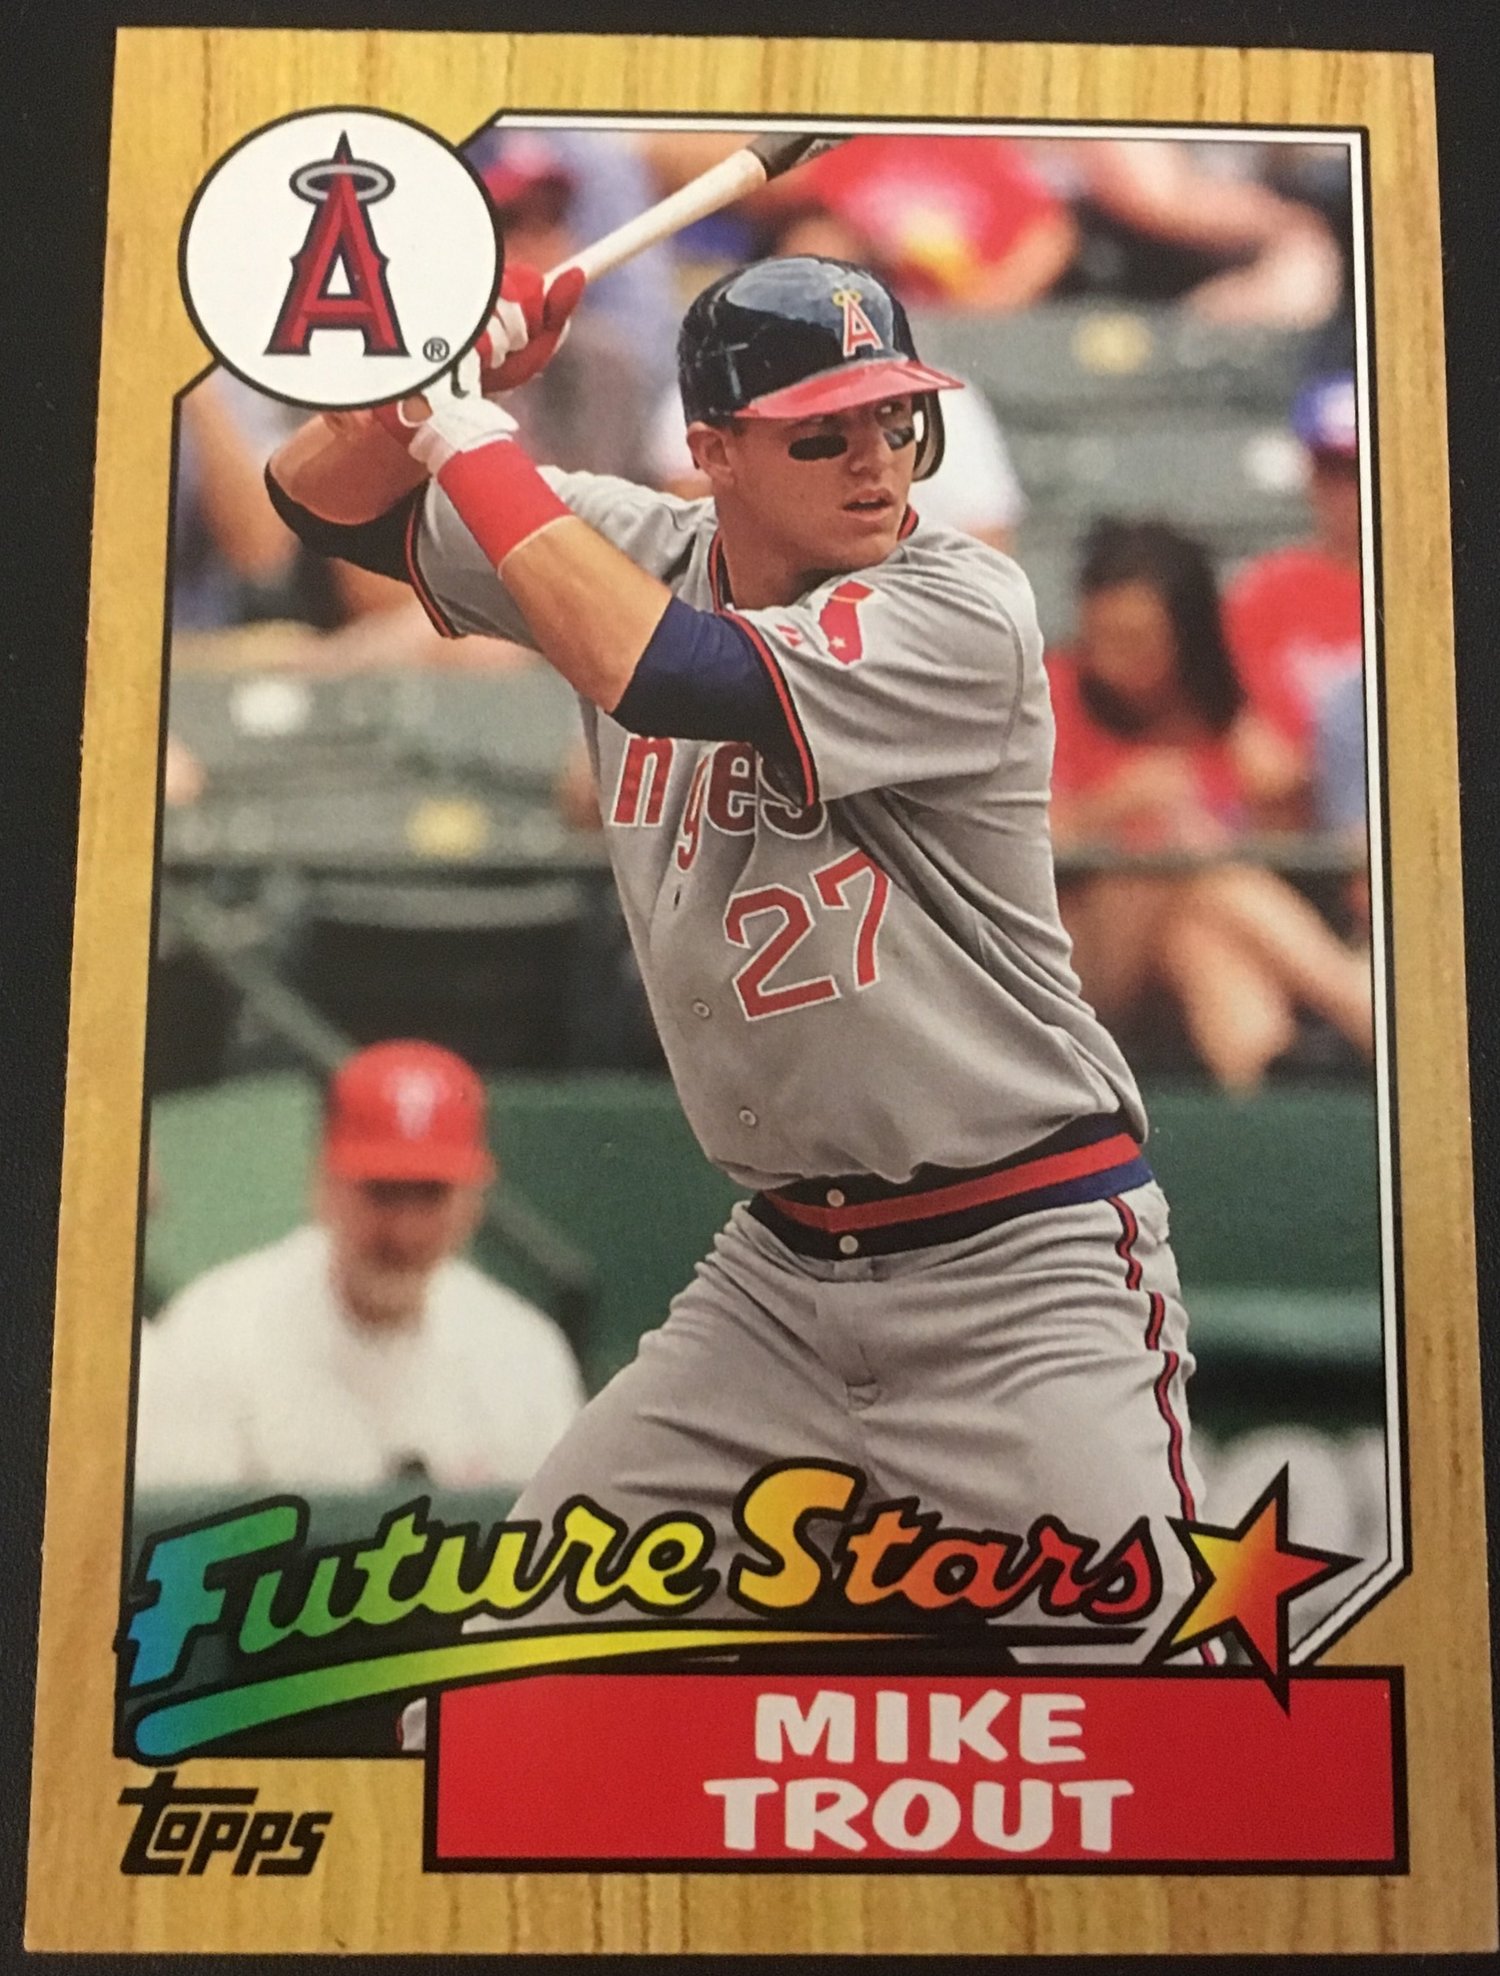  2012 Topps Update Series All-Star - Mike Trout - 2nd